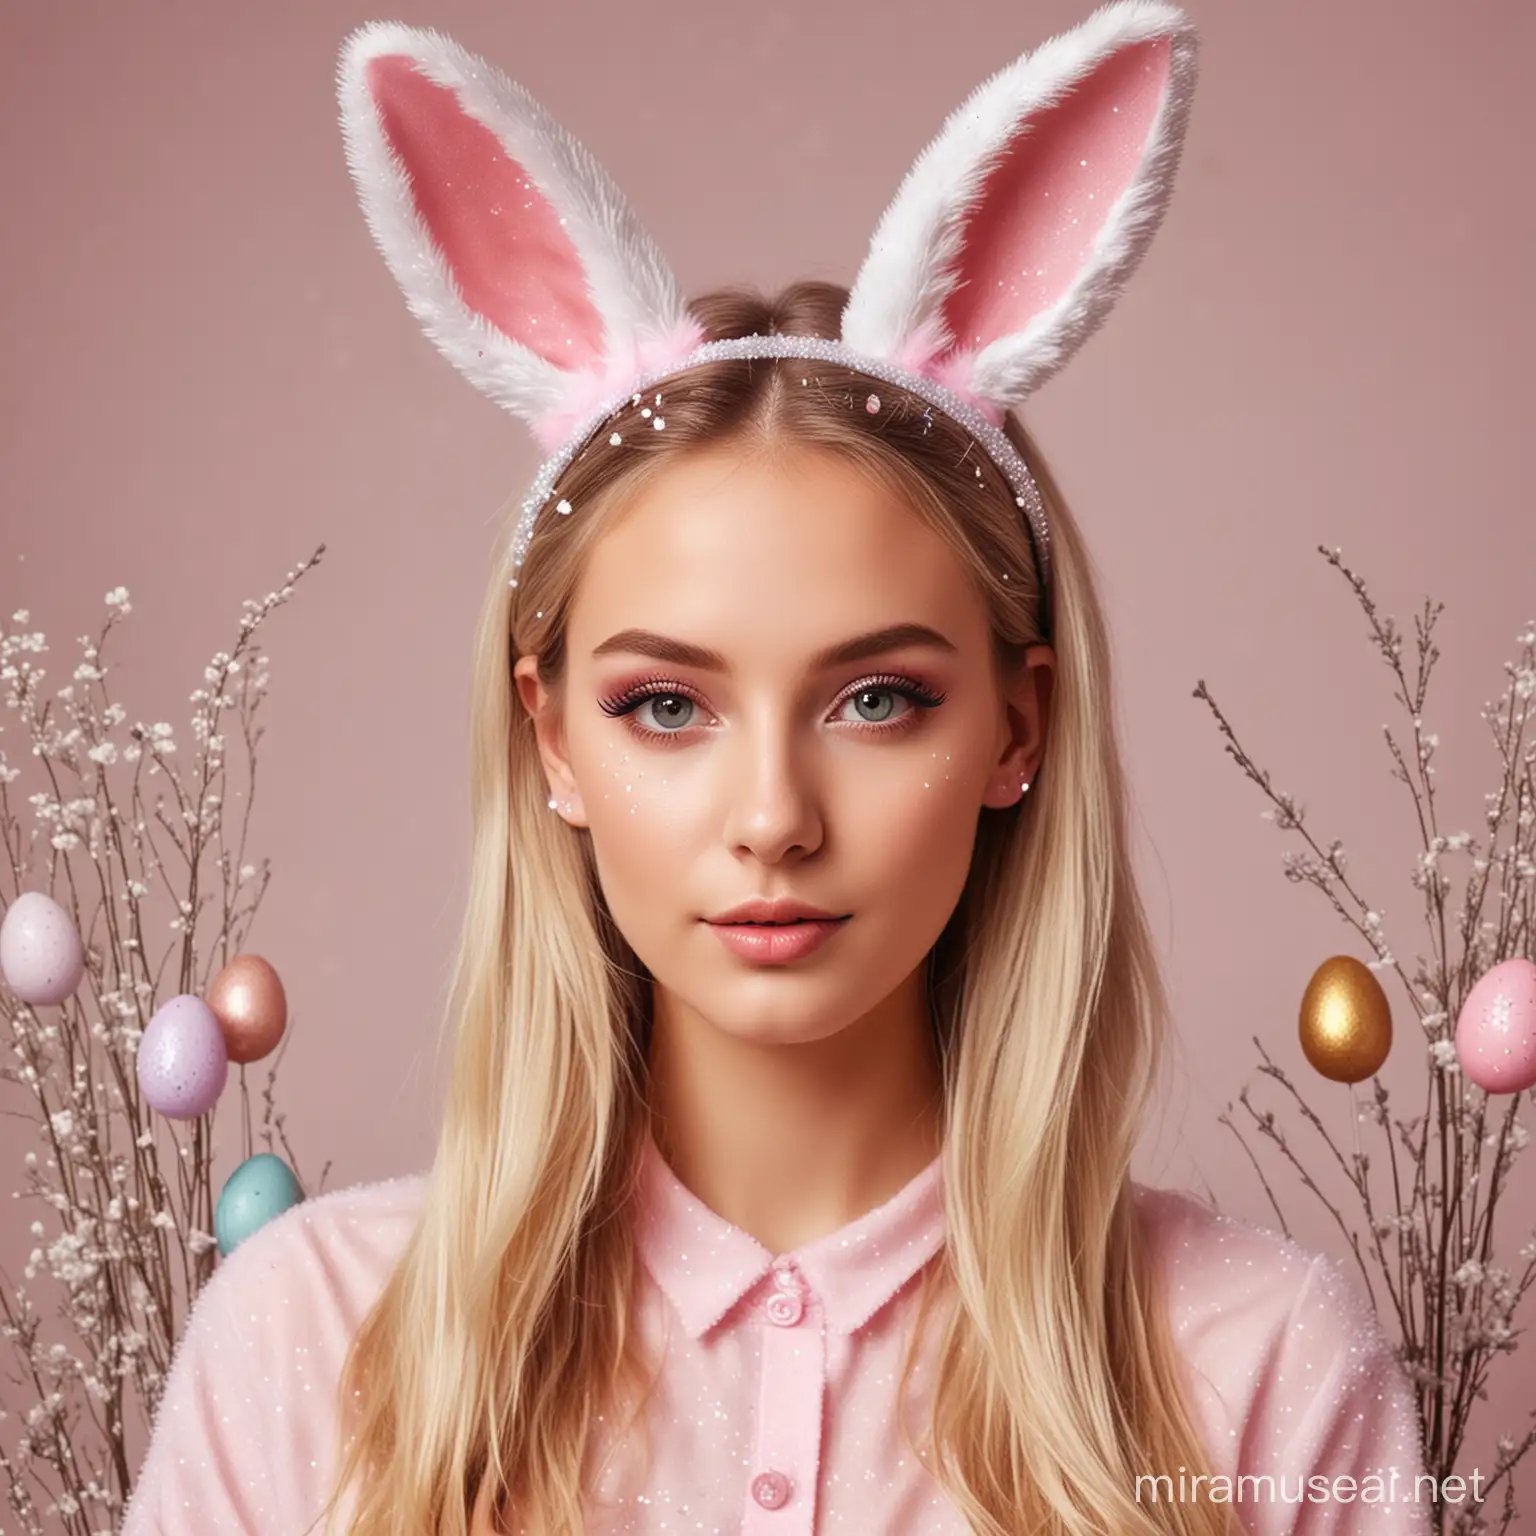 Fashion Model with Glittery Rabbit Ears Amidst Easter Eggs